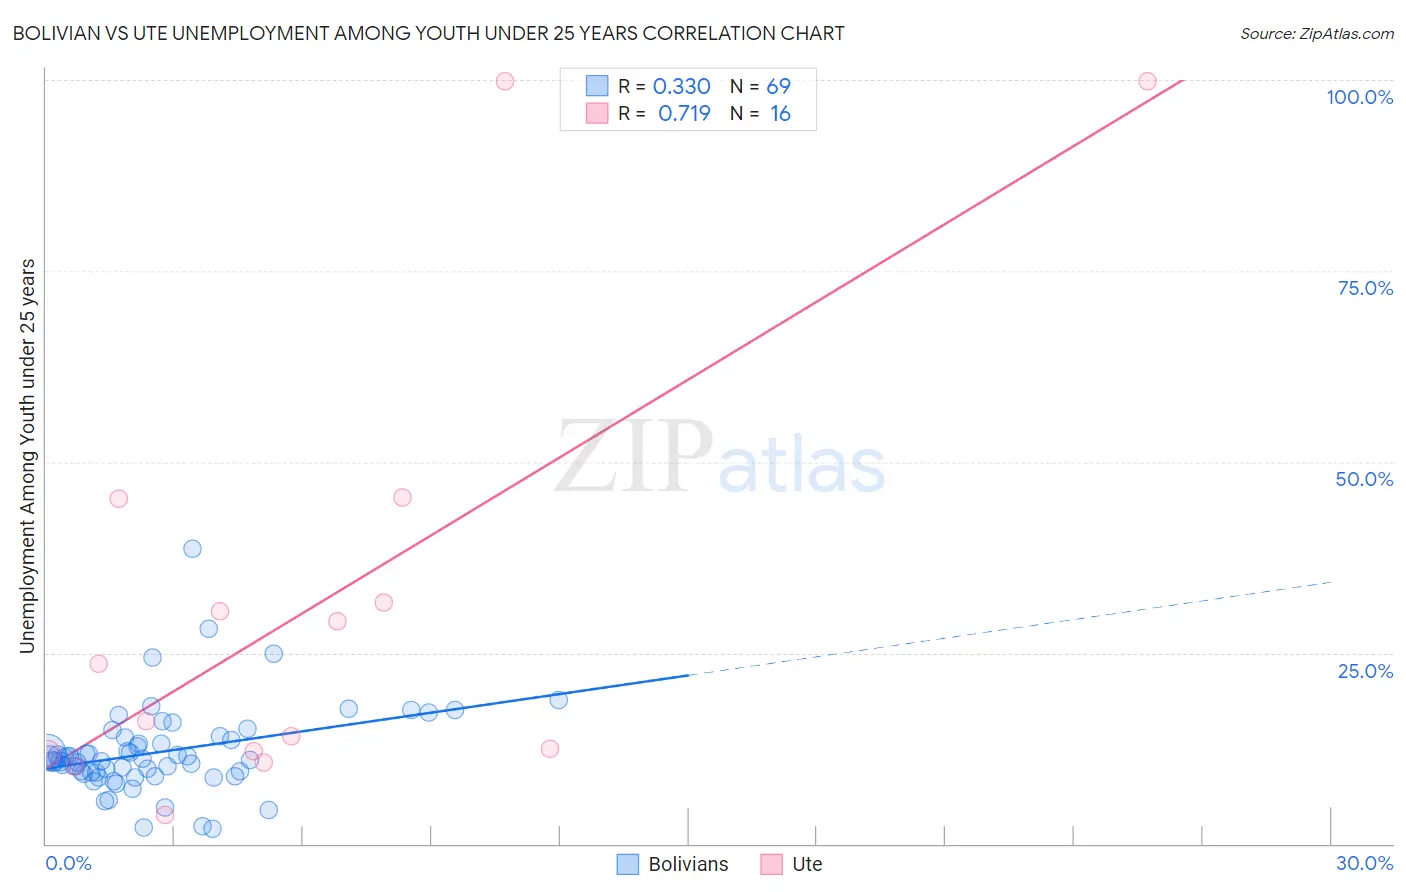 Bolivian vs Ute Unemployment Among Youth under 25 years